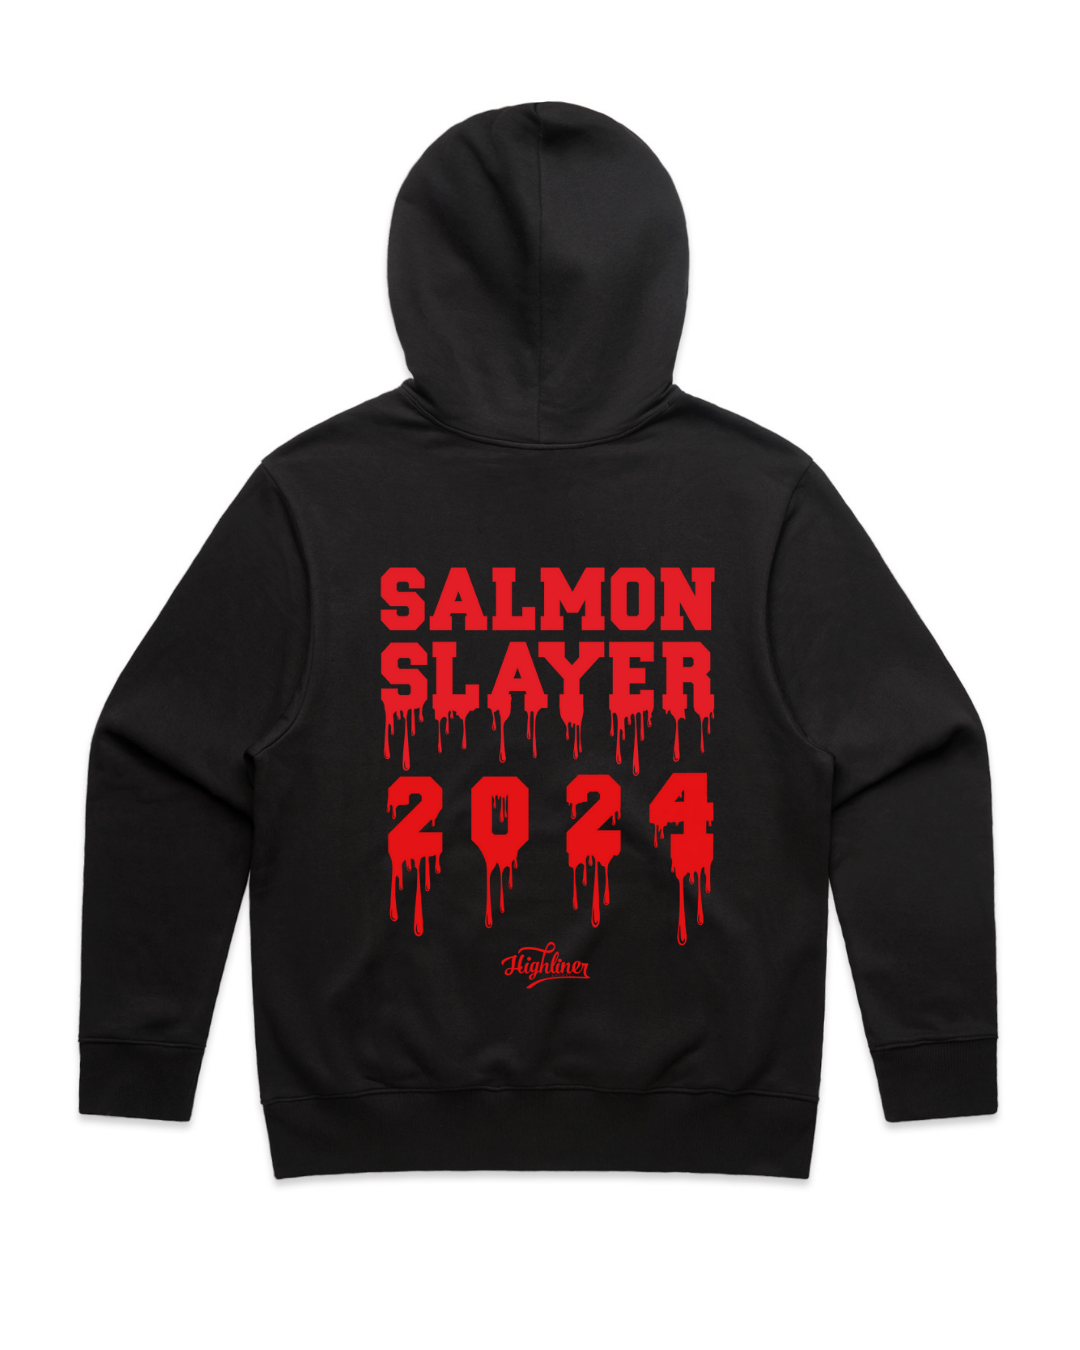 Black Salmon Slayer 2024 Collaboration Hoodie with No Pebble design on -  Highlinerapparel